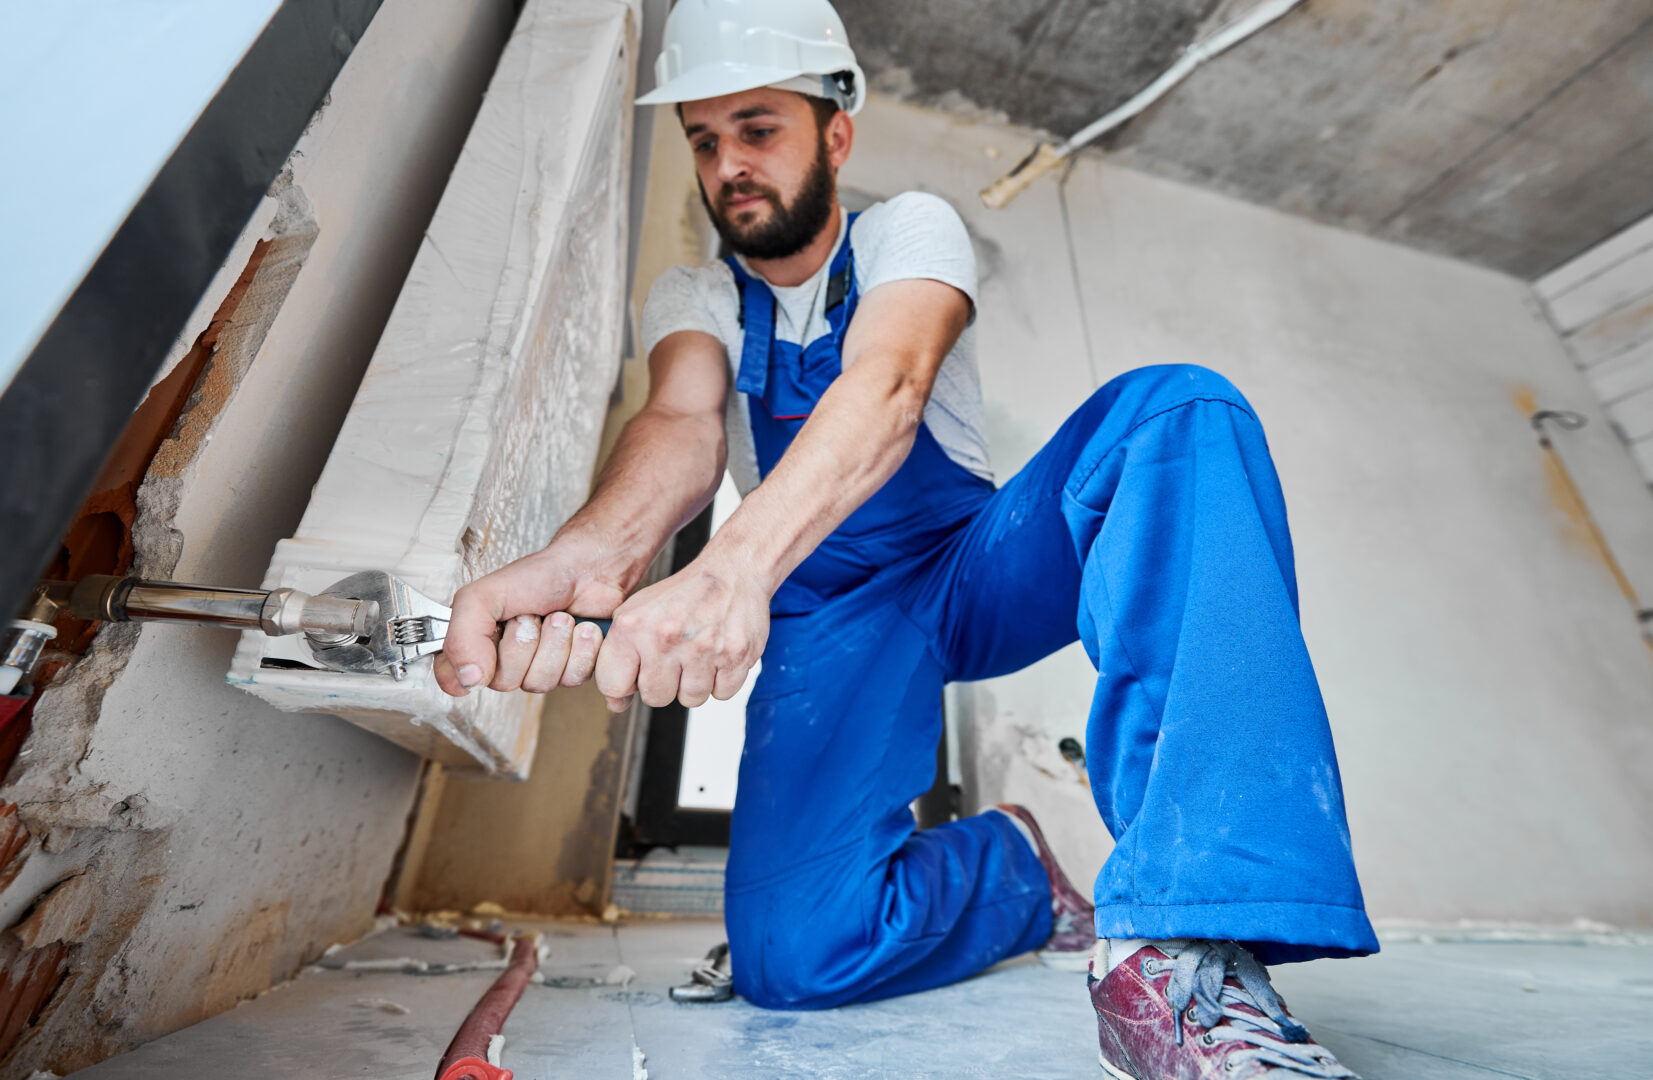 Horizontal snapshot of plumber screwing plumbing fittings with a wrench. Low angle view on man, wearing blue overalls and helmet, working with construction tool with both hands applying force